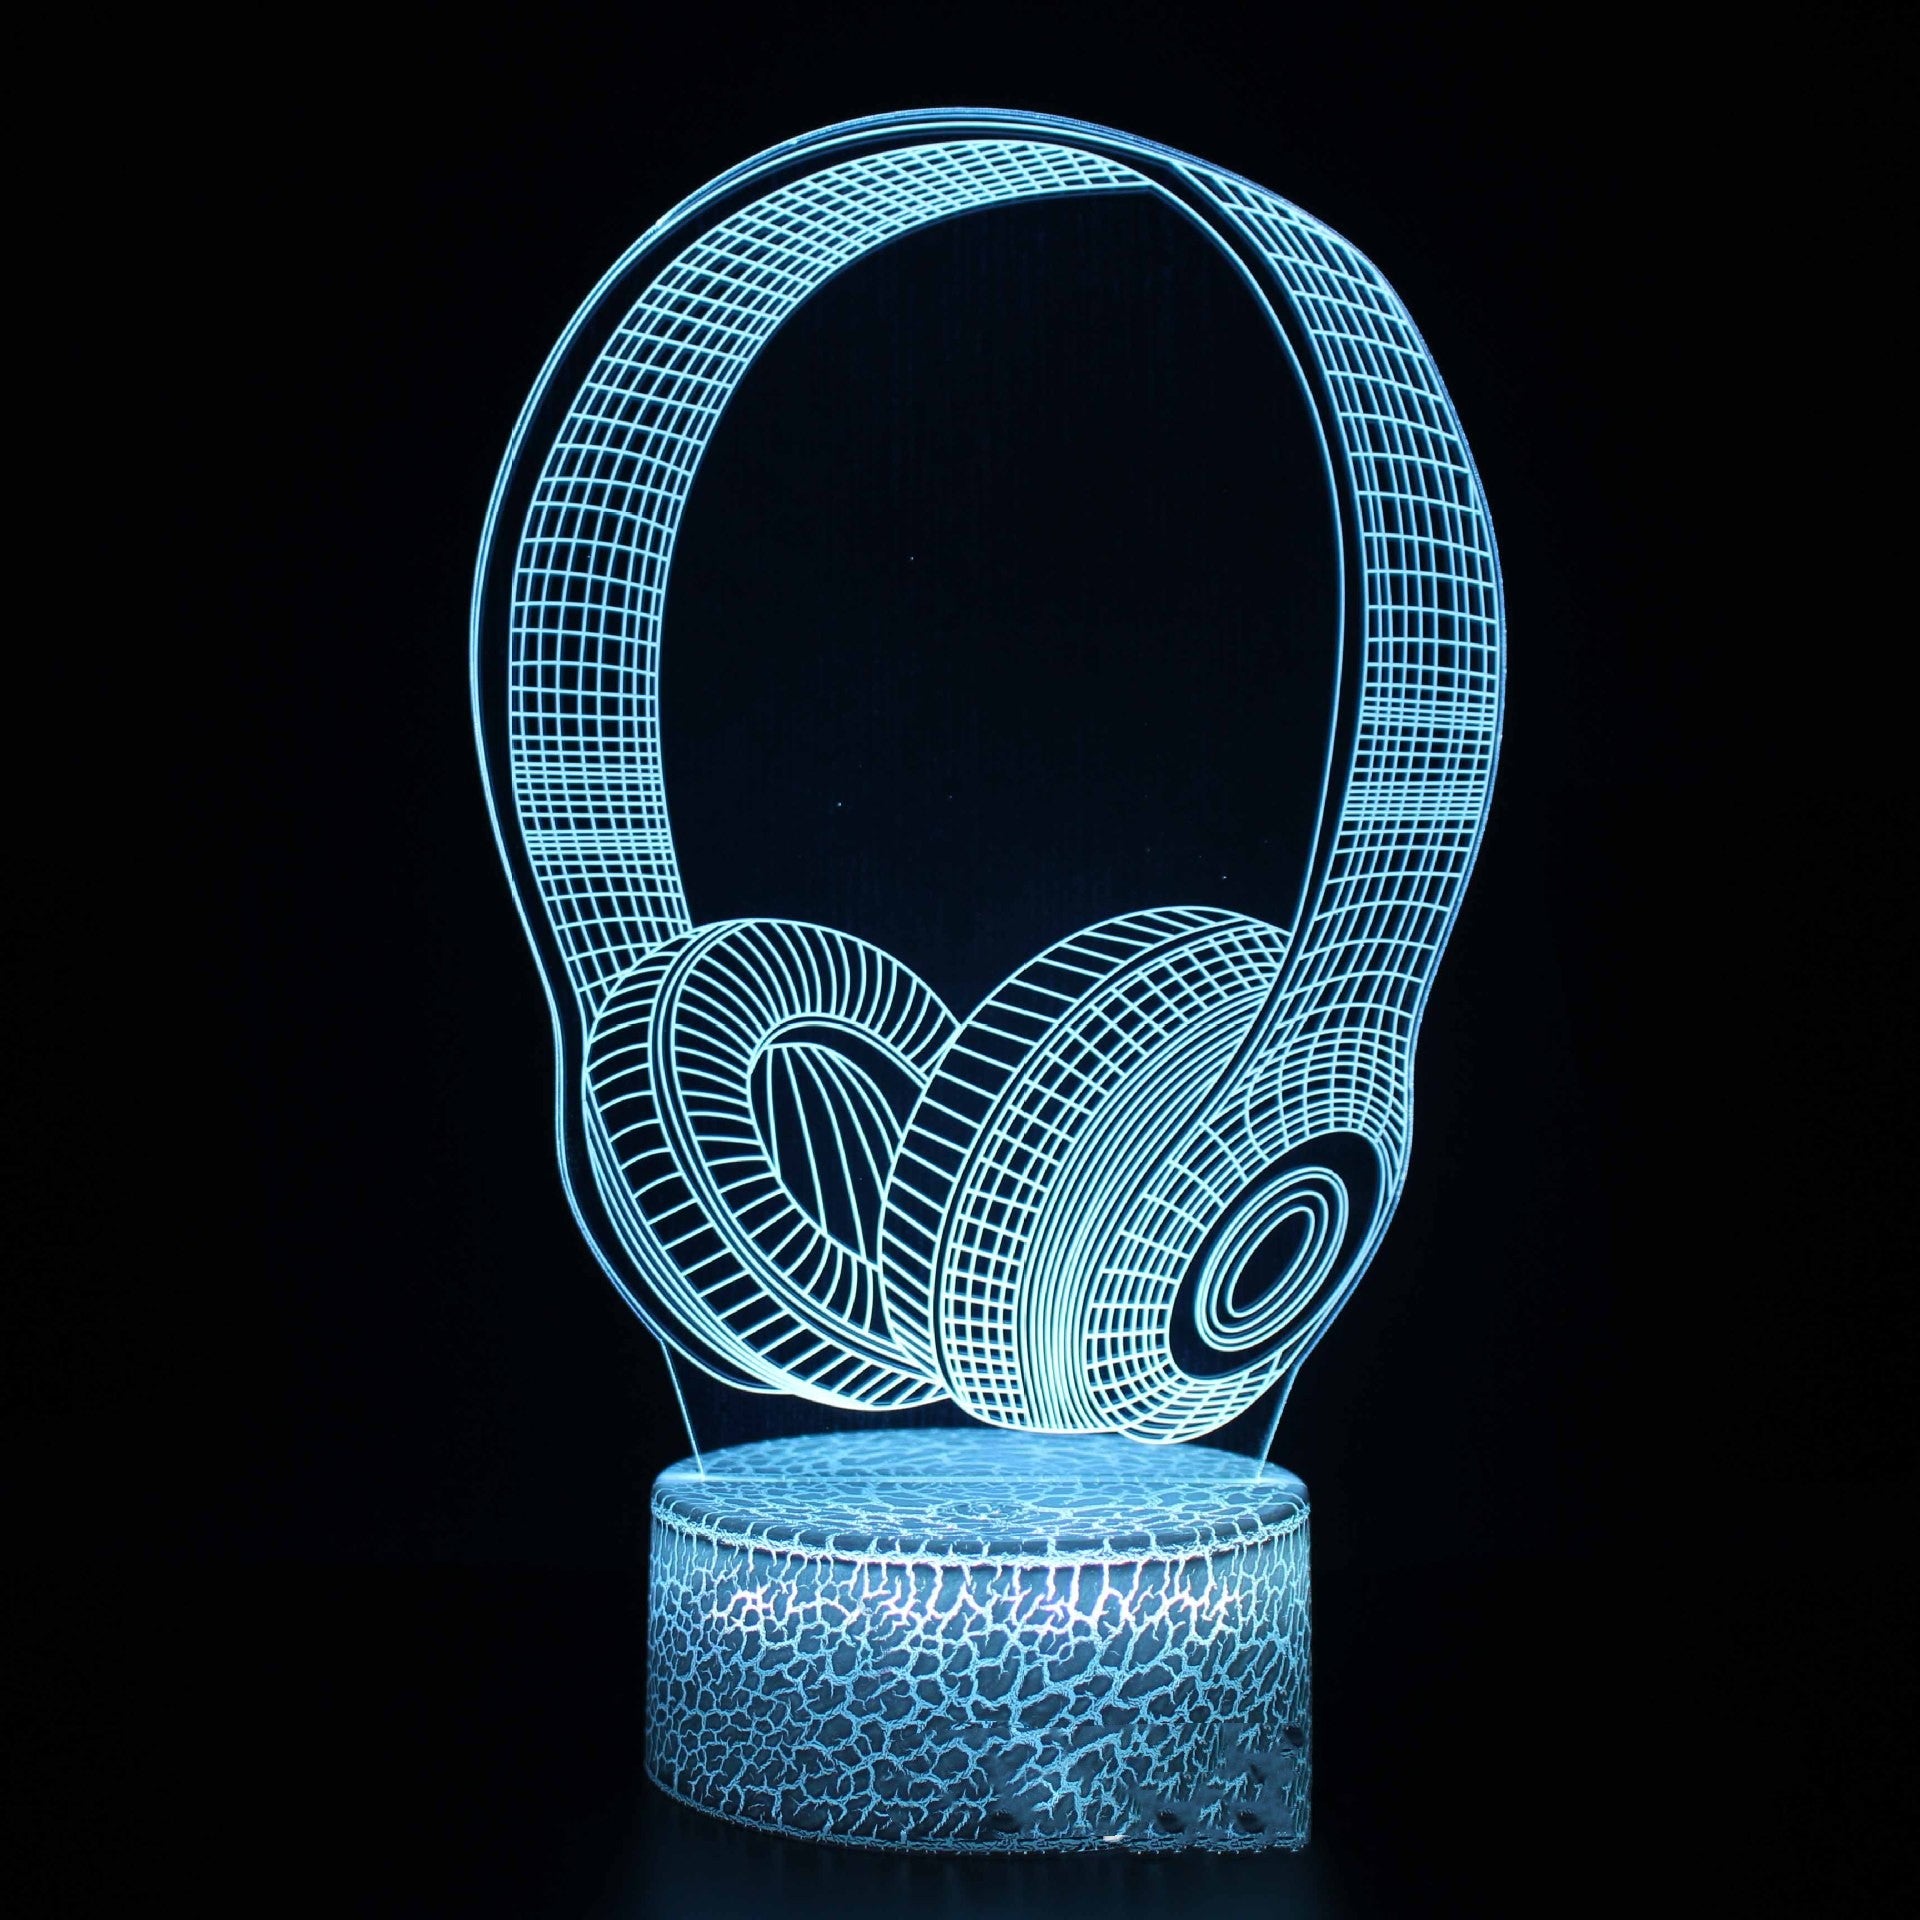 Creative 3d Small Night Lamp Desktop Decorative Lamp Headset 7 Color Changing Led Touch Remote Control Bedside Table Lamp